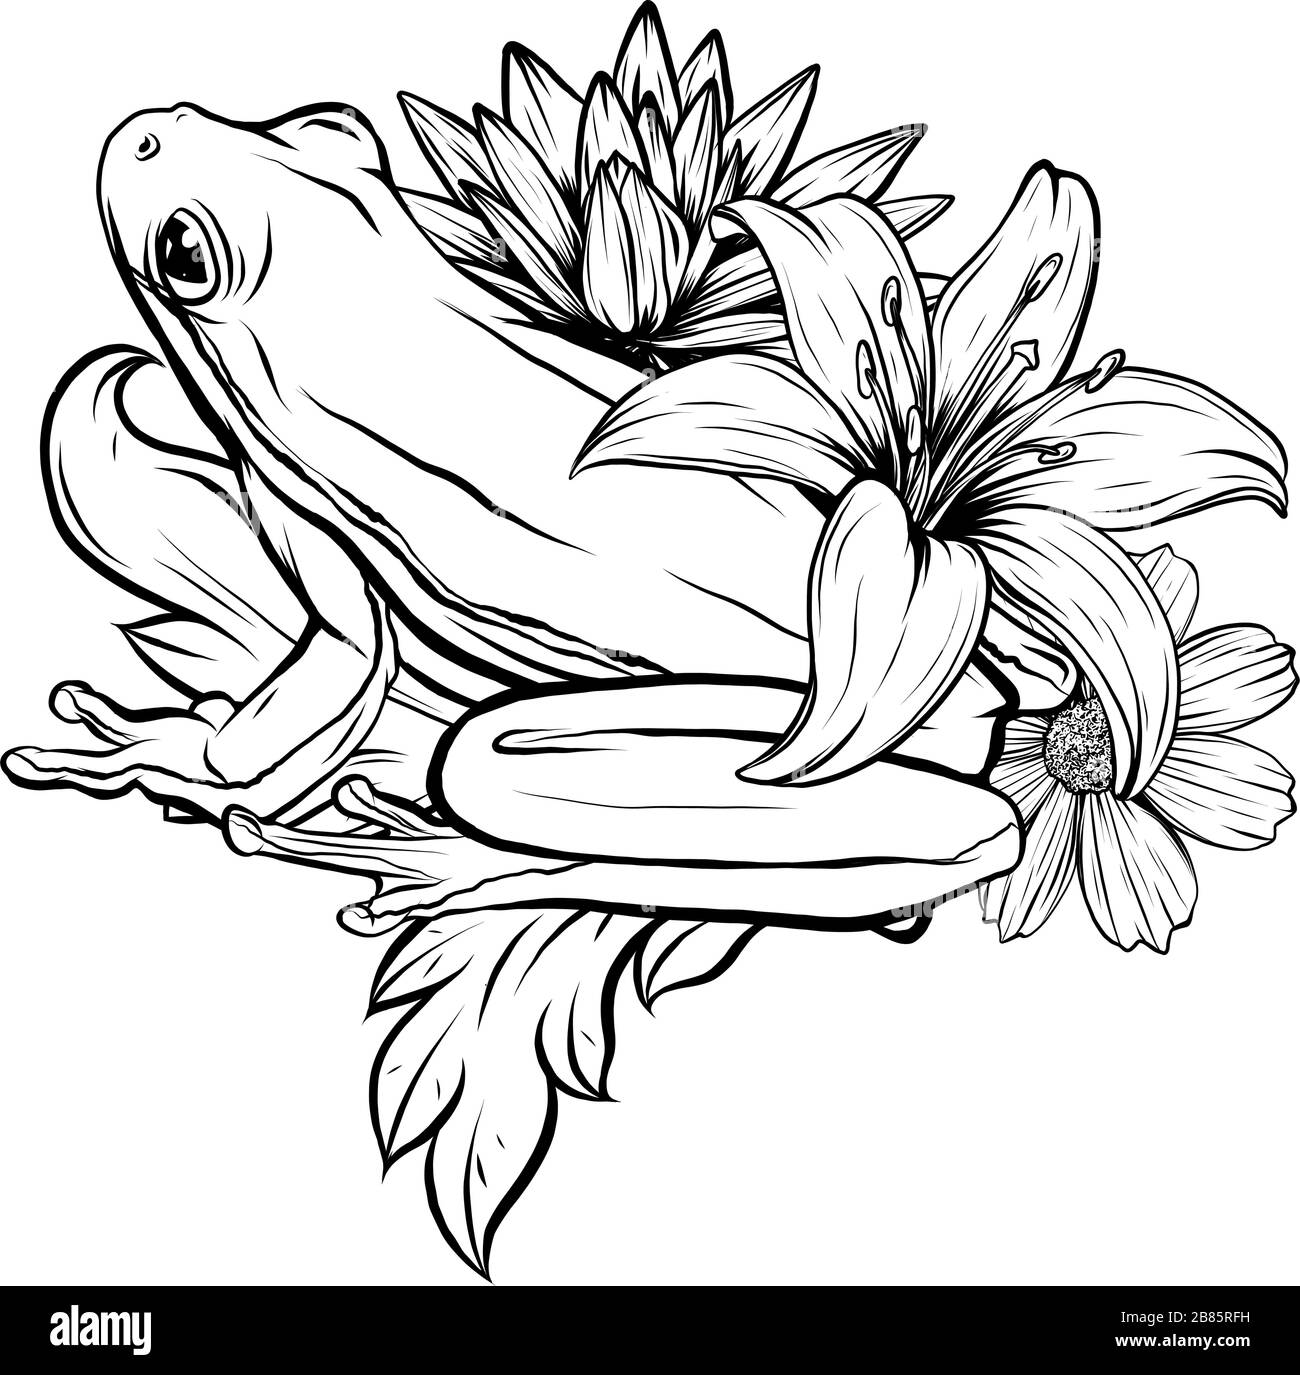 Black and white hand drawn ornate doodle frog in graphic style. Vector illustration with floral decorative ornament Stock Vector